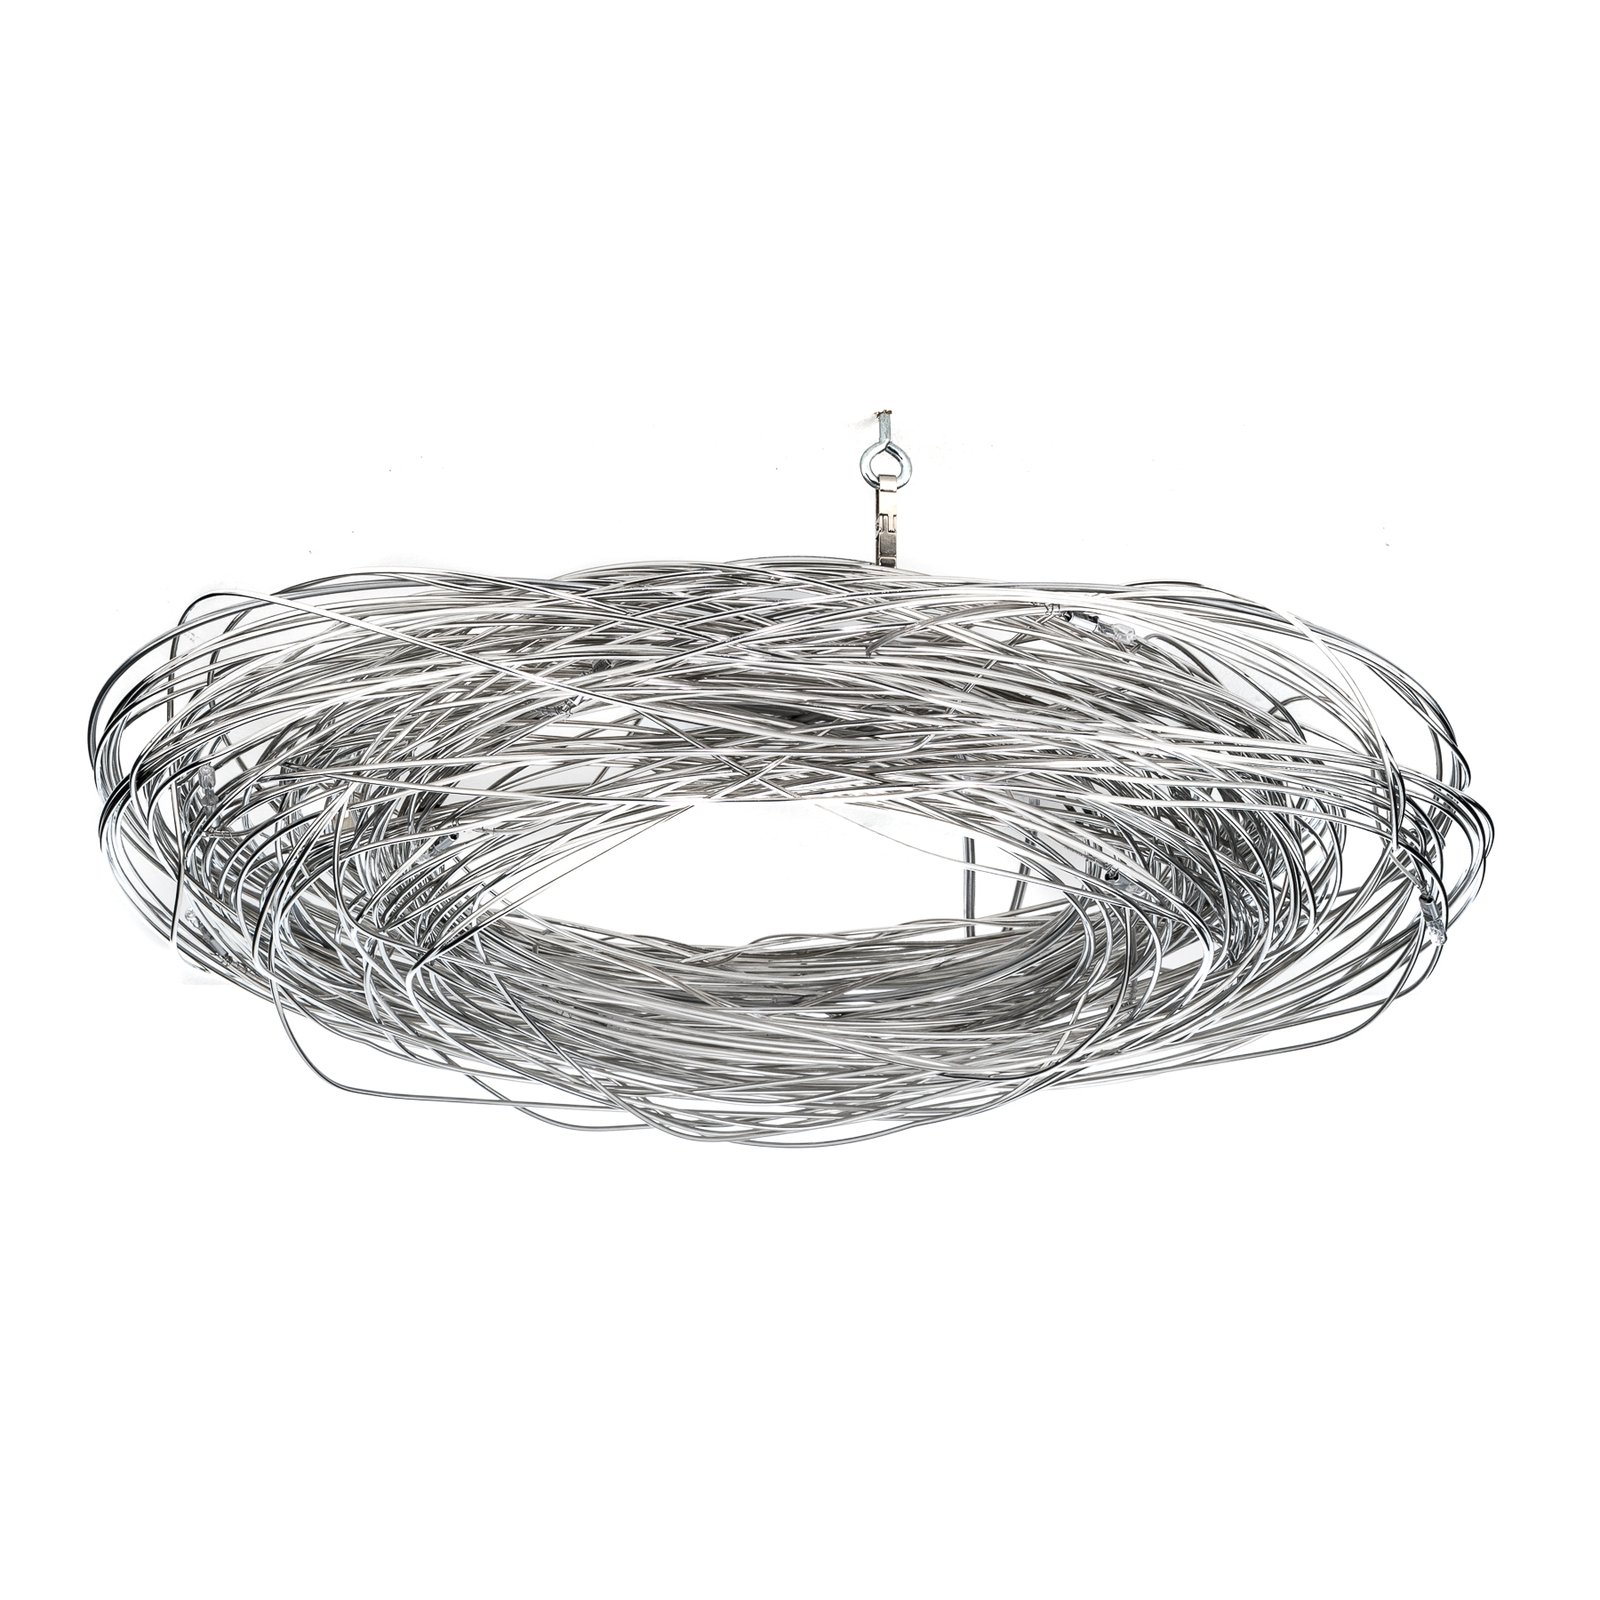 Knikerboker Confusione - ceiling light, 75 cm